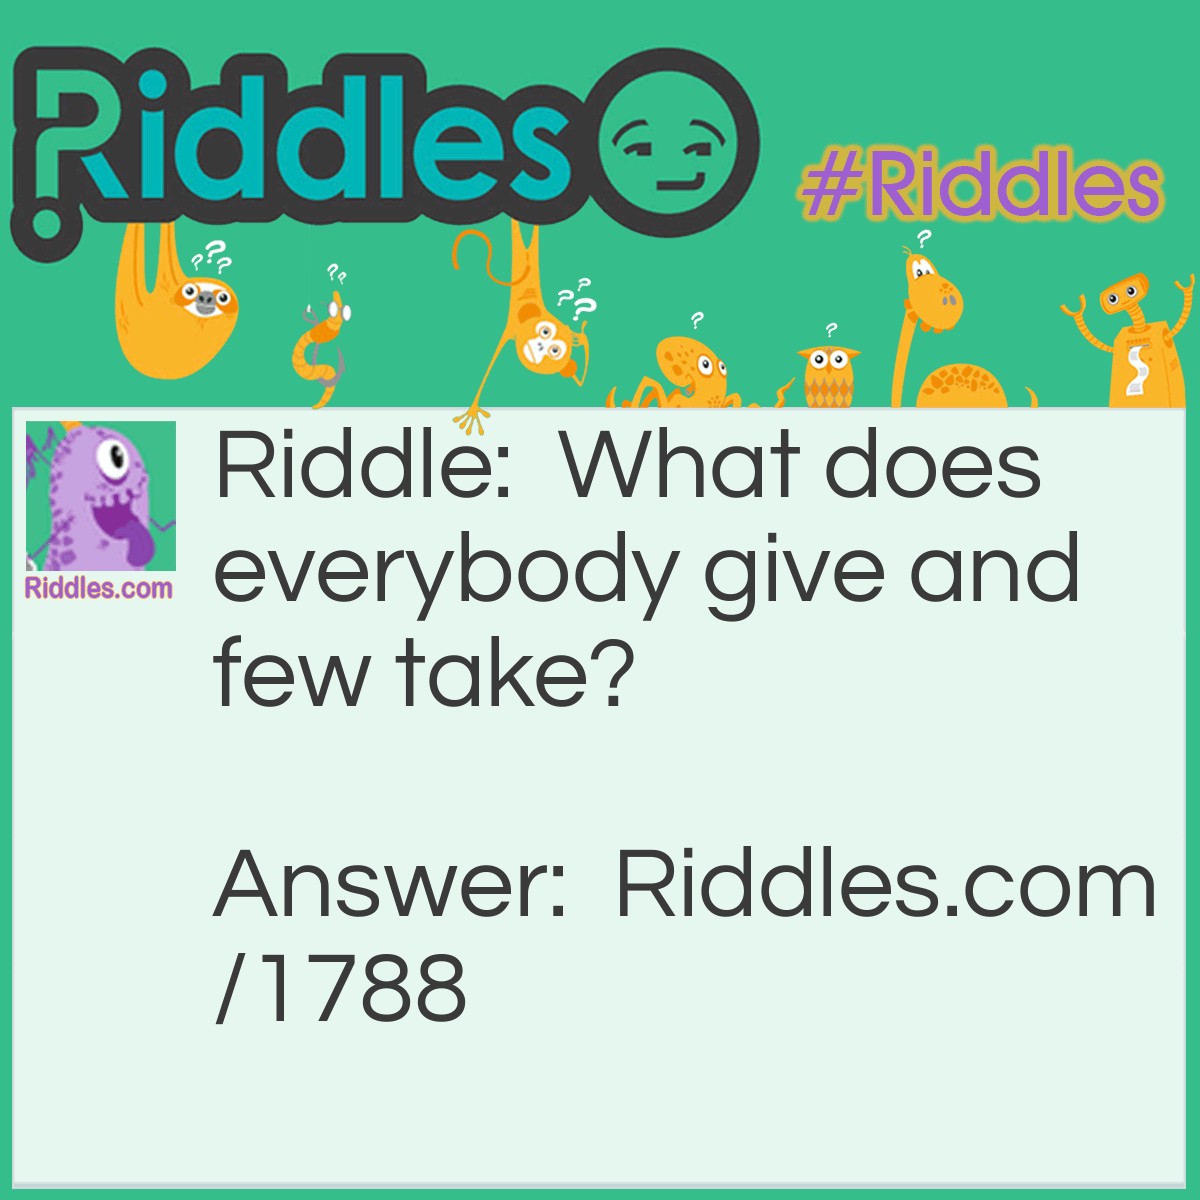 Riddle: What does everybody give and few take? Answer: Advice.